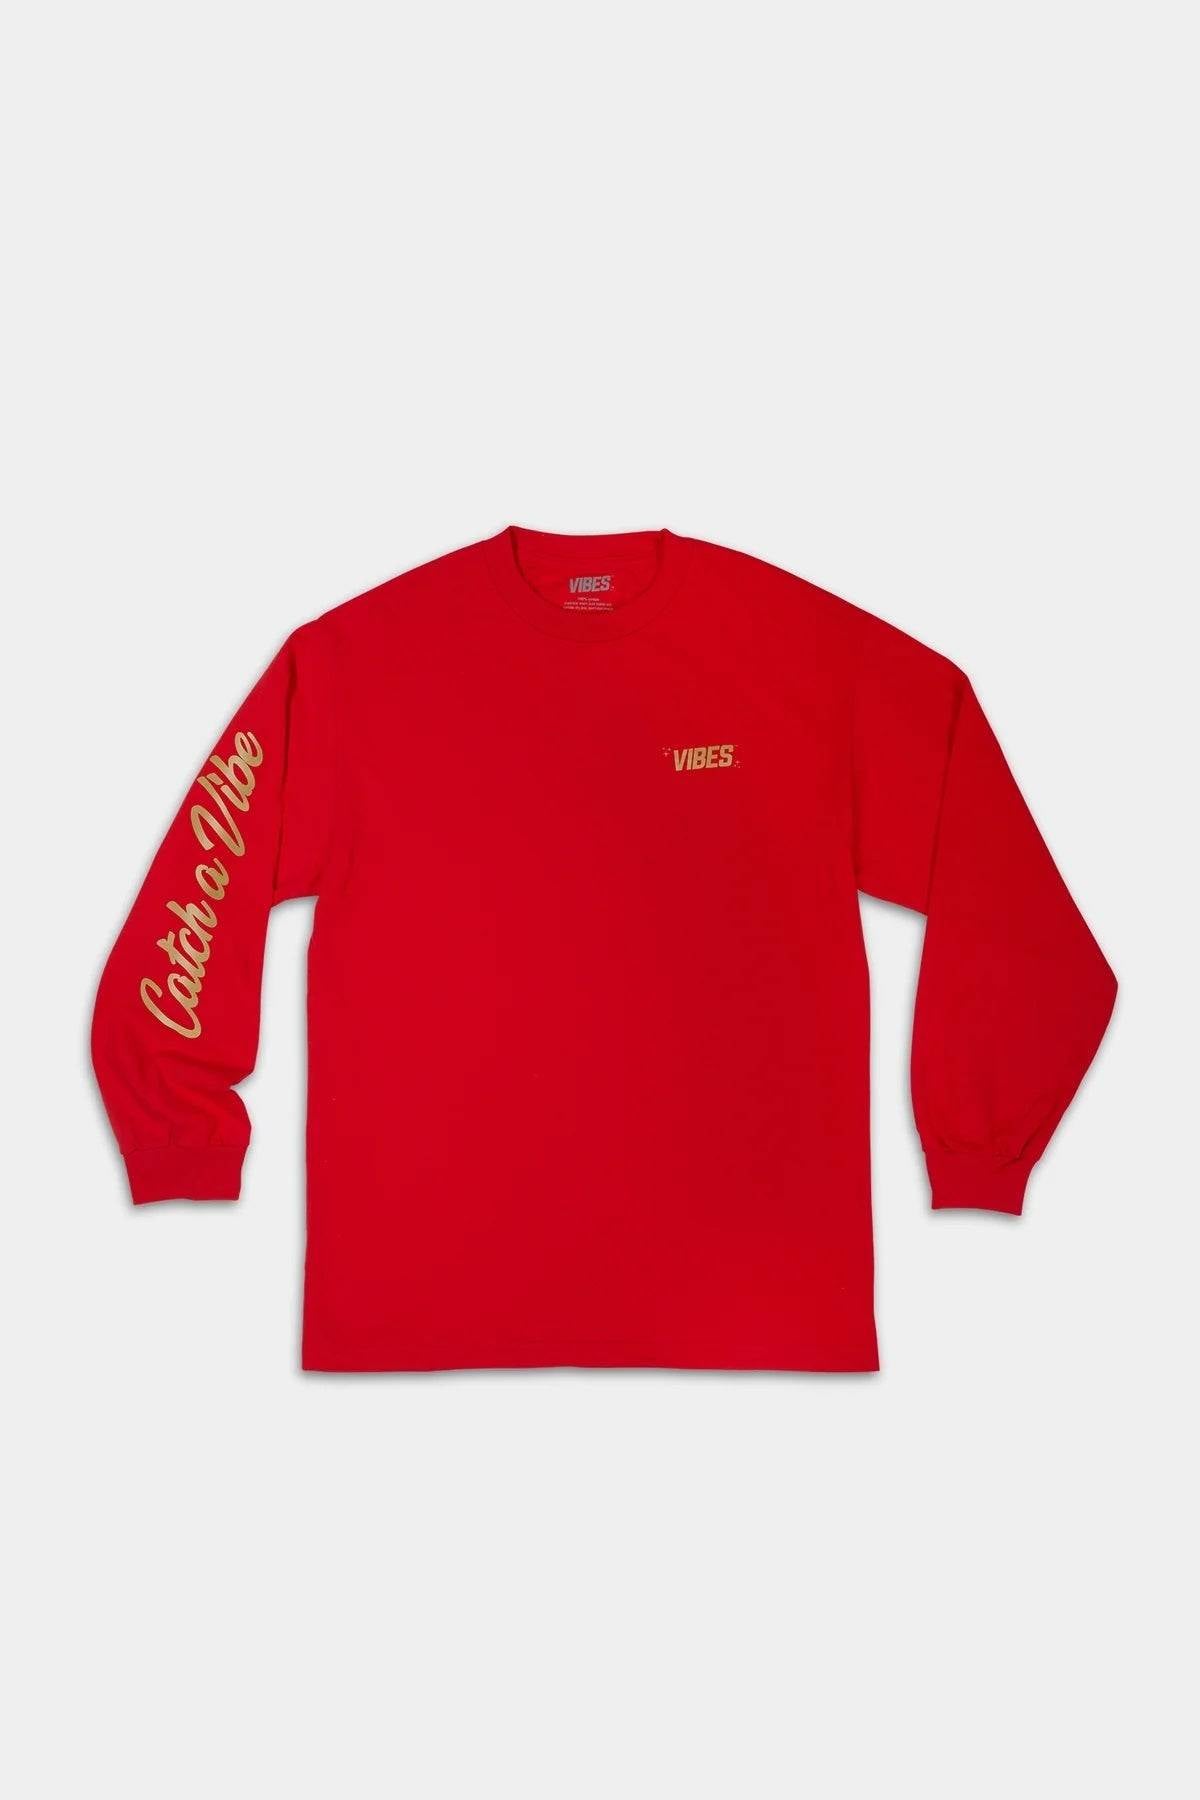 VIBES Red Catch A Vibe Long Sleeve Shirt X-Large